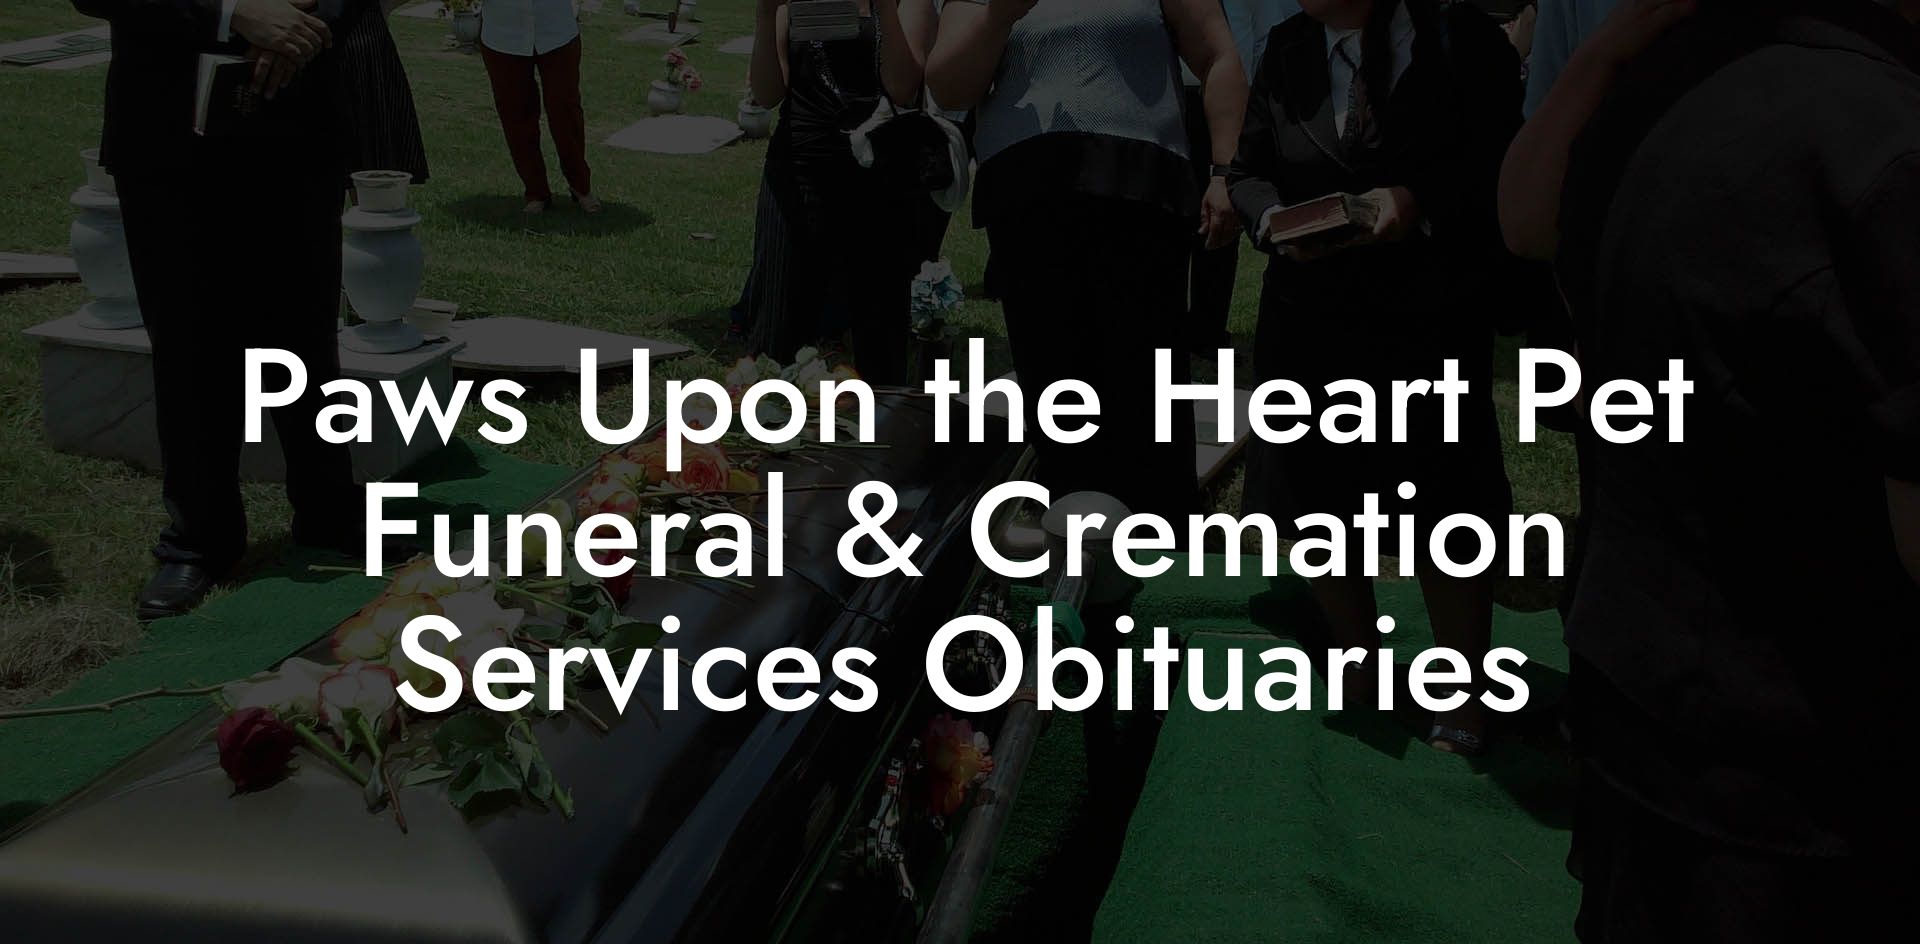 Paws Upon the Heart Pet Funeral & Cremation Services Obituaries